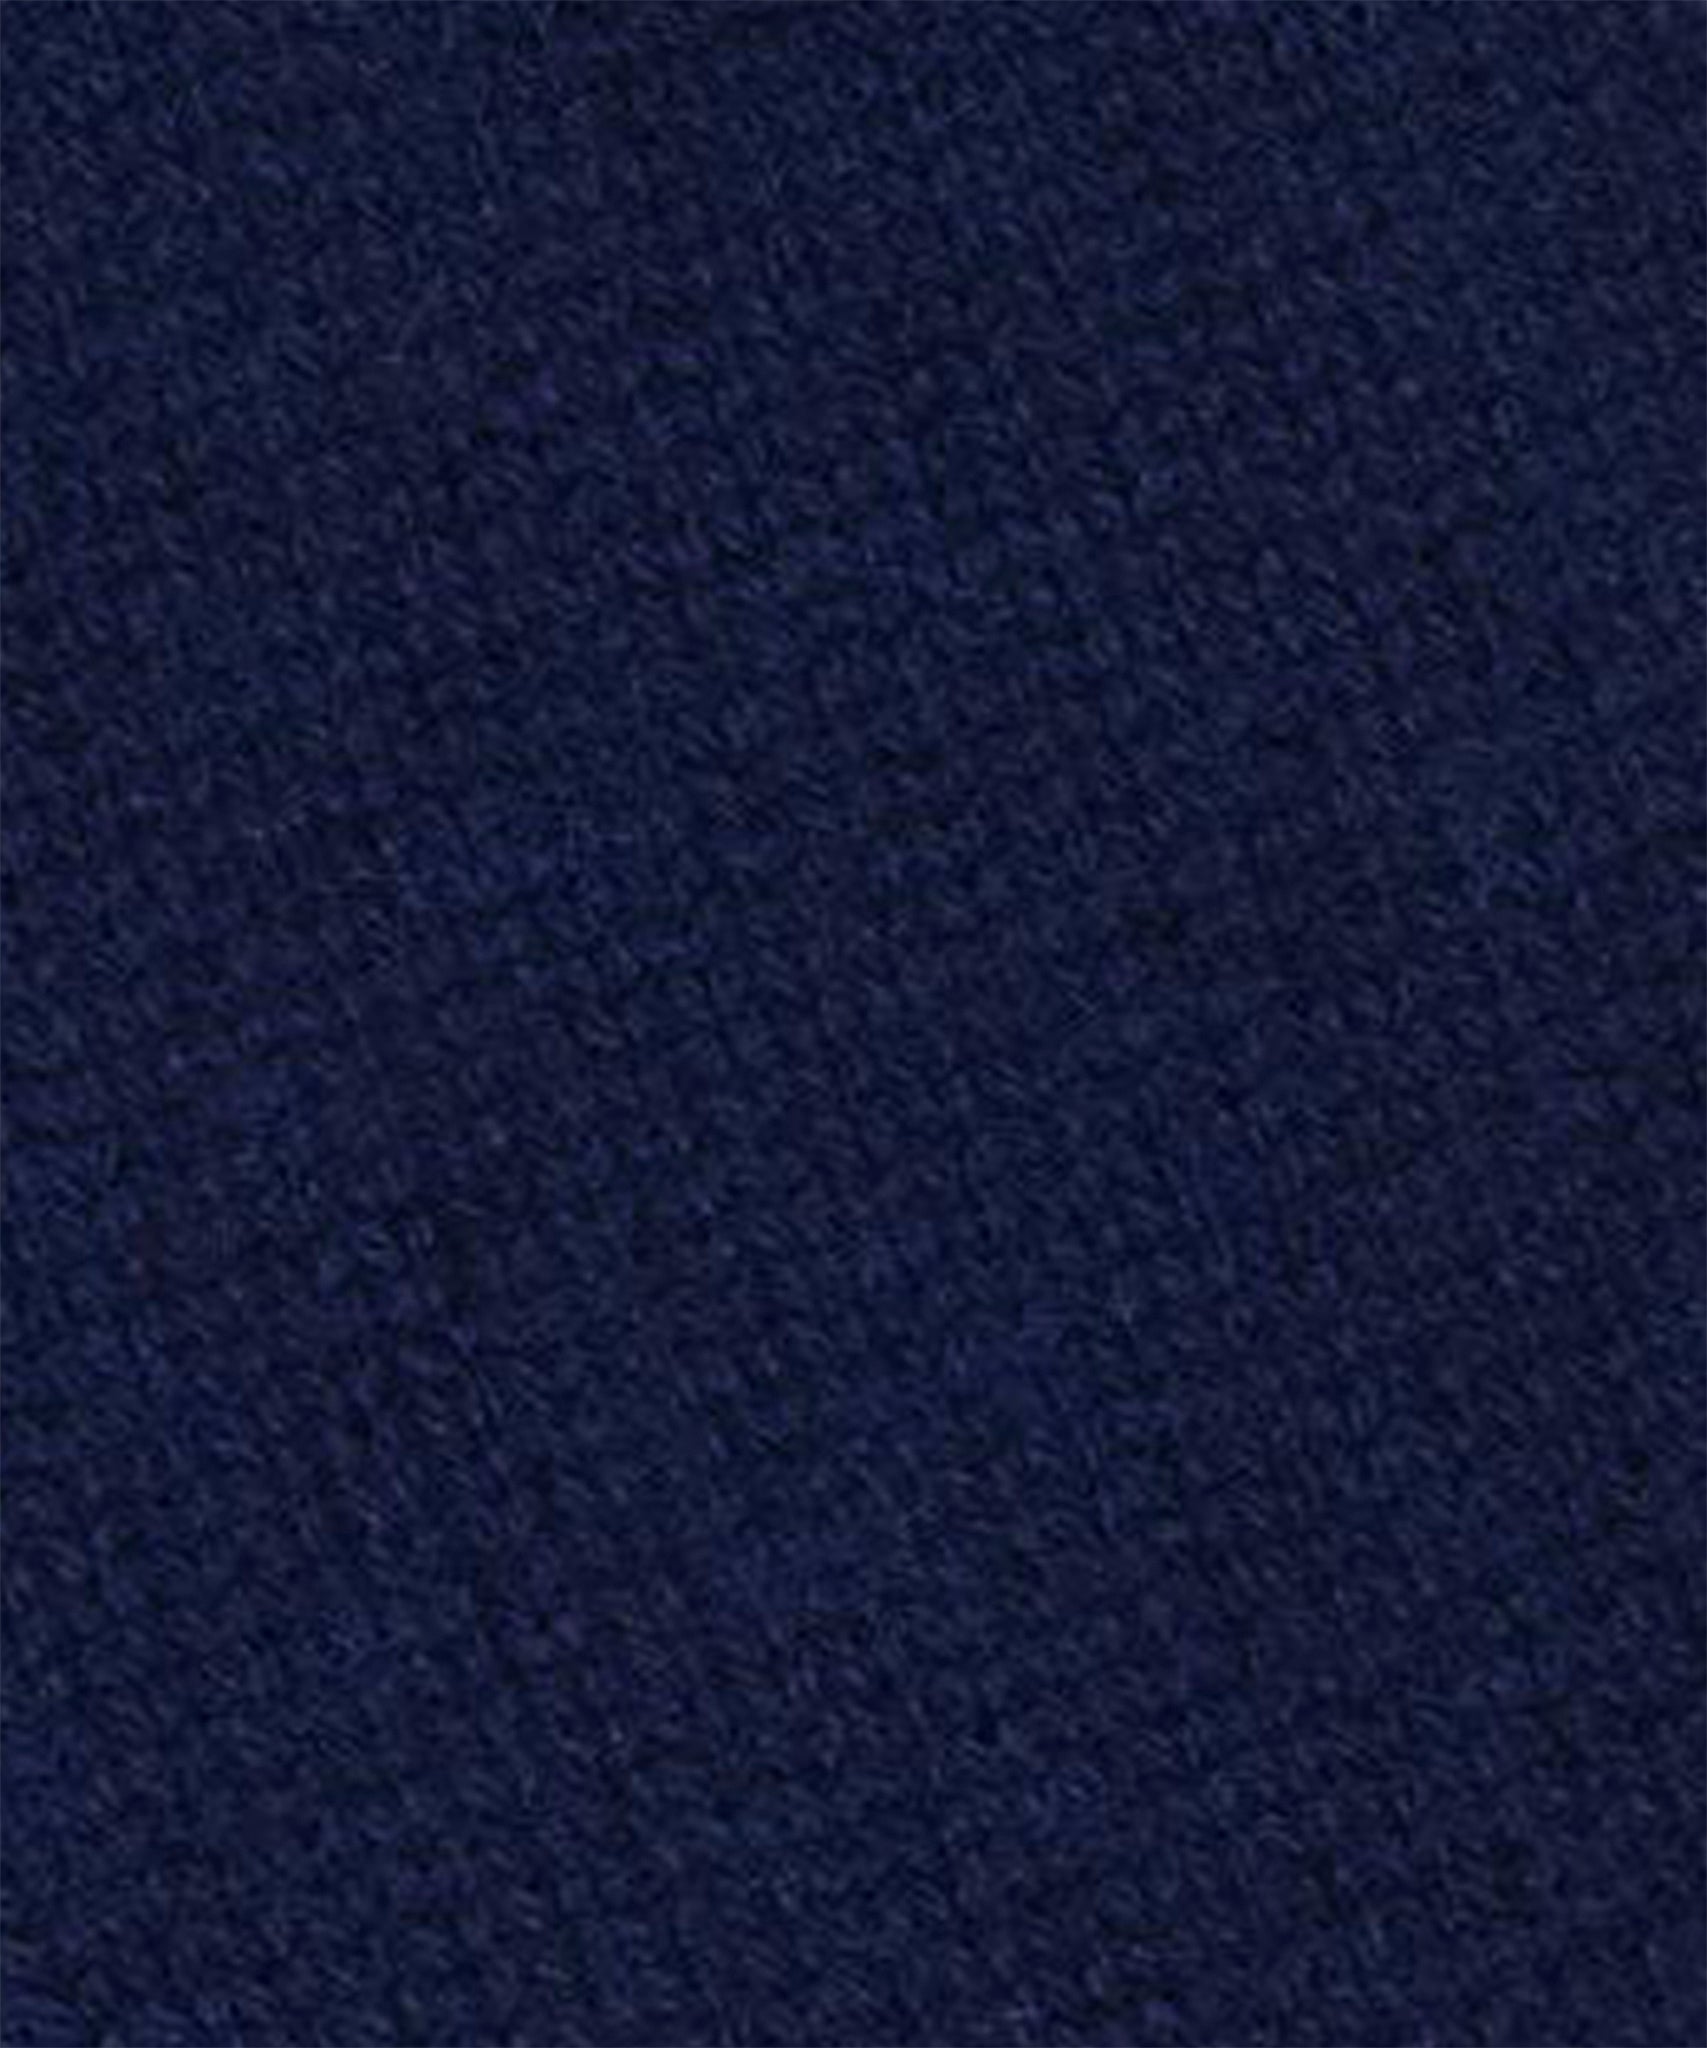 Wool/Cashmere  Gloves in color Navy